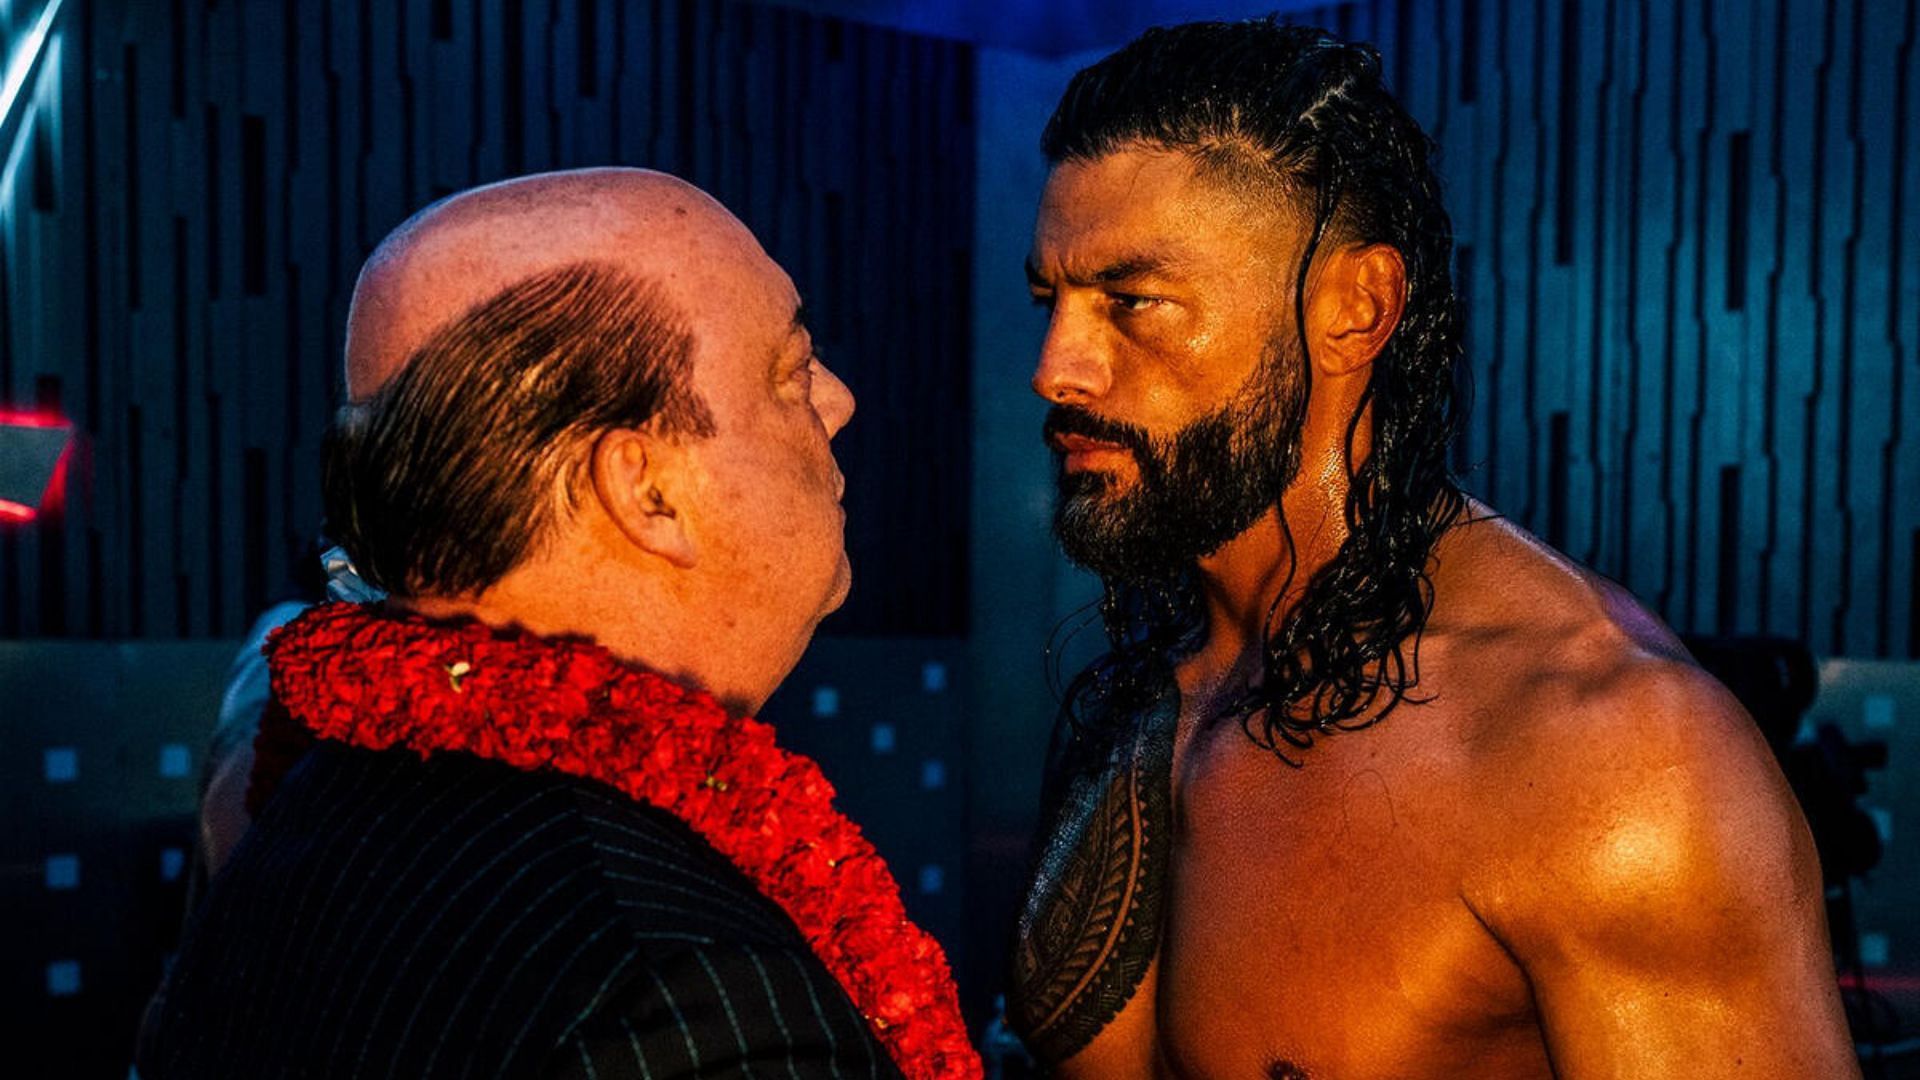 Roman Reigns and Paul Heyman are Bloodline members